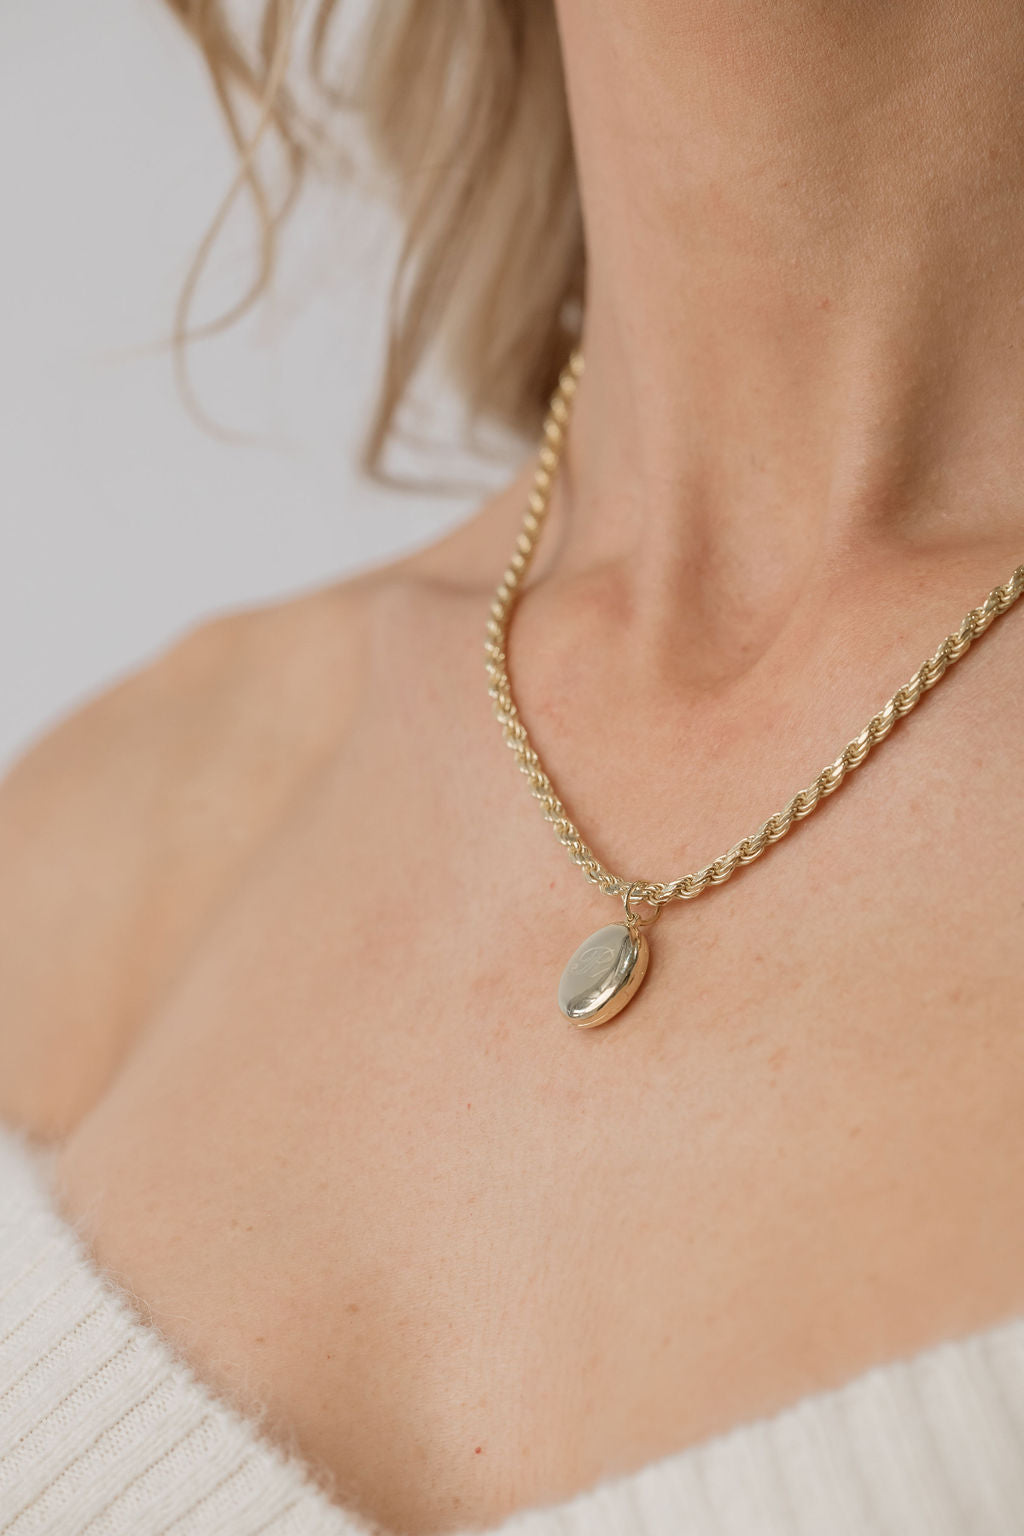 model wearing gold oval locket with rope chain necklace